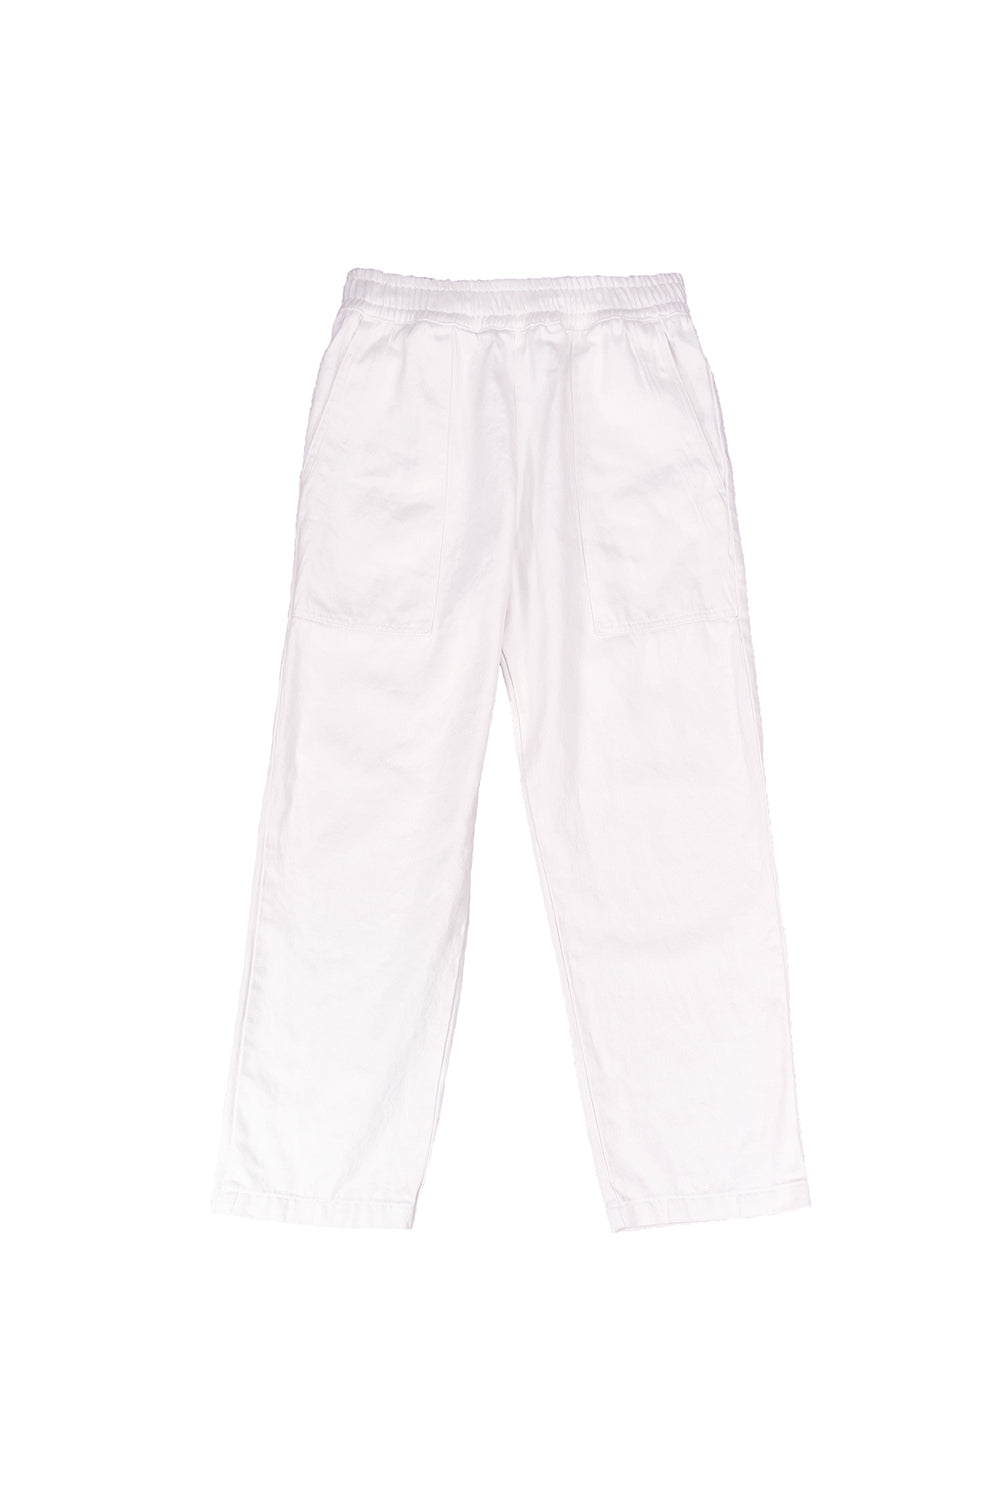 Ocean Pant | Jungmaven Hemp Clothing & Accessories / Color: Washed White